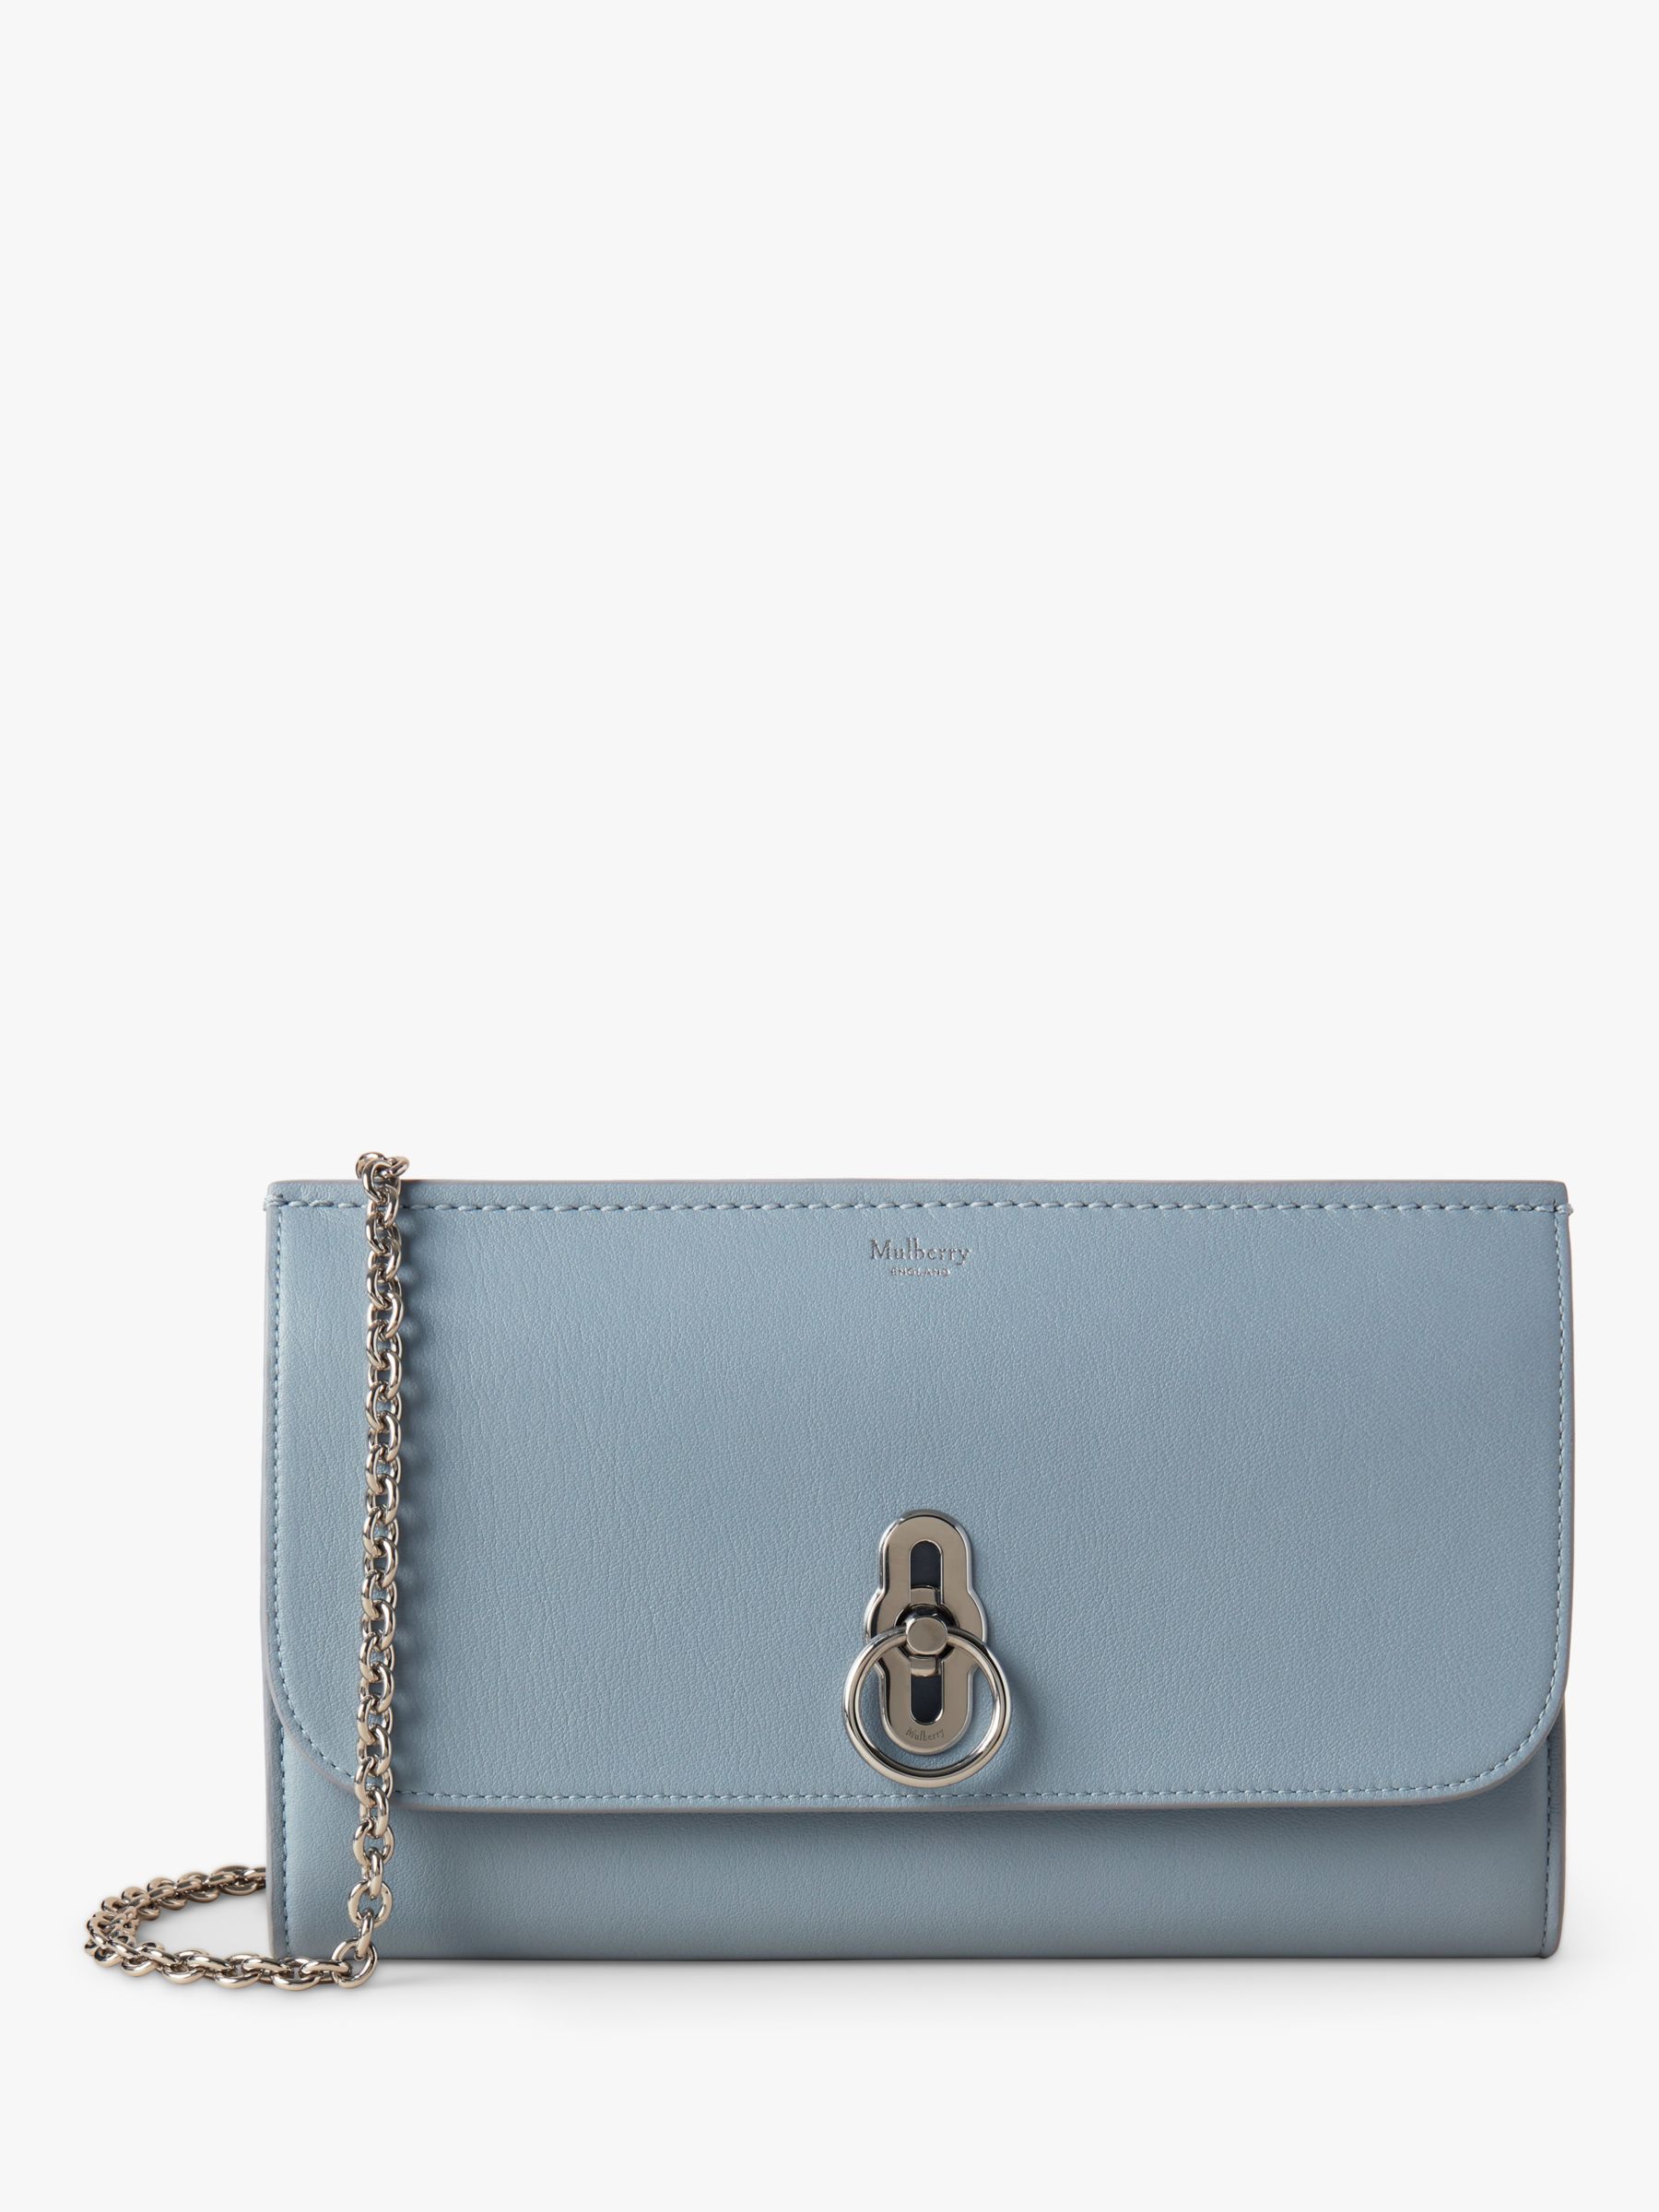 Mulberry Amberley Silky Calf Leather Clutch Bag, Cloud at John Lewis ...